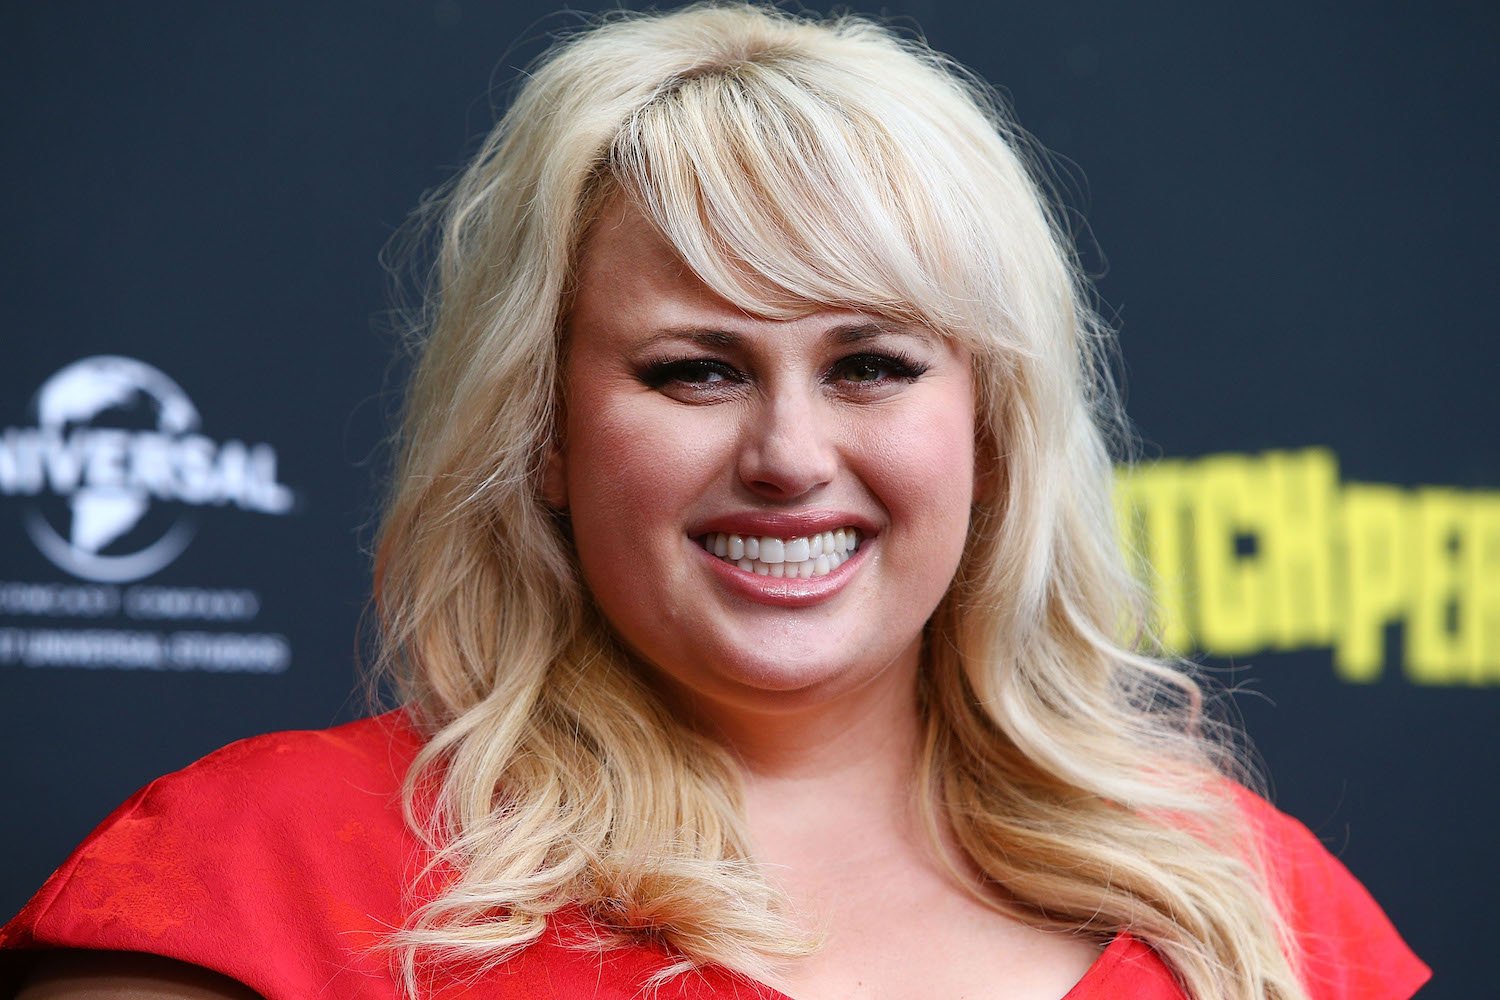 Rebel Wilson Weight Loss Secret Is the Mayr Method, But What Is It?